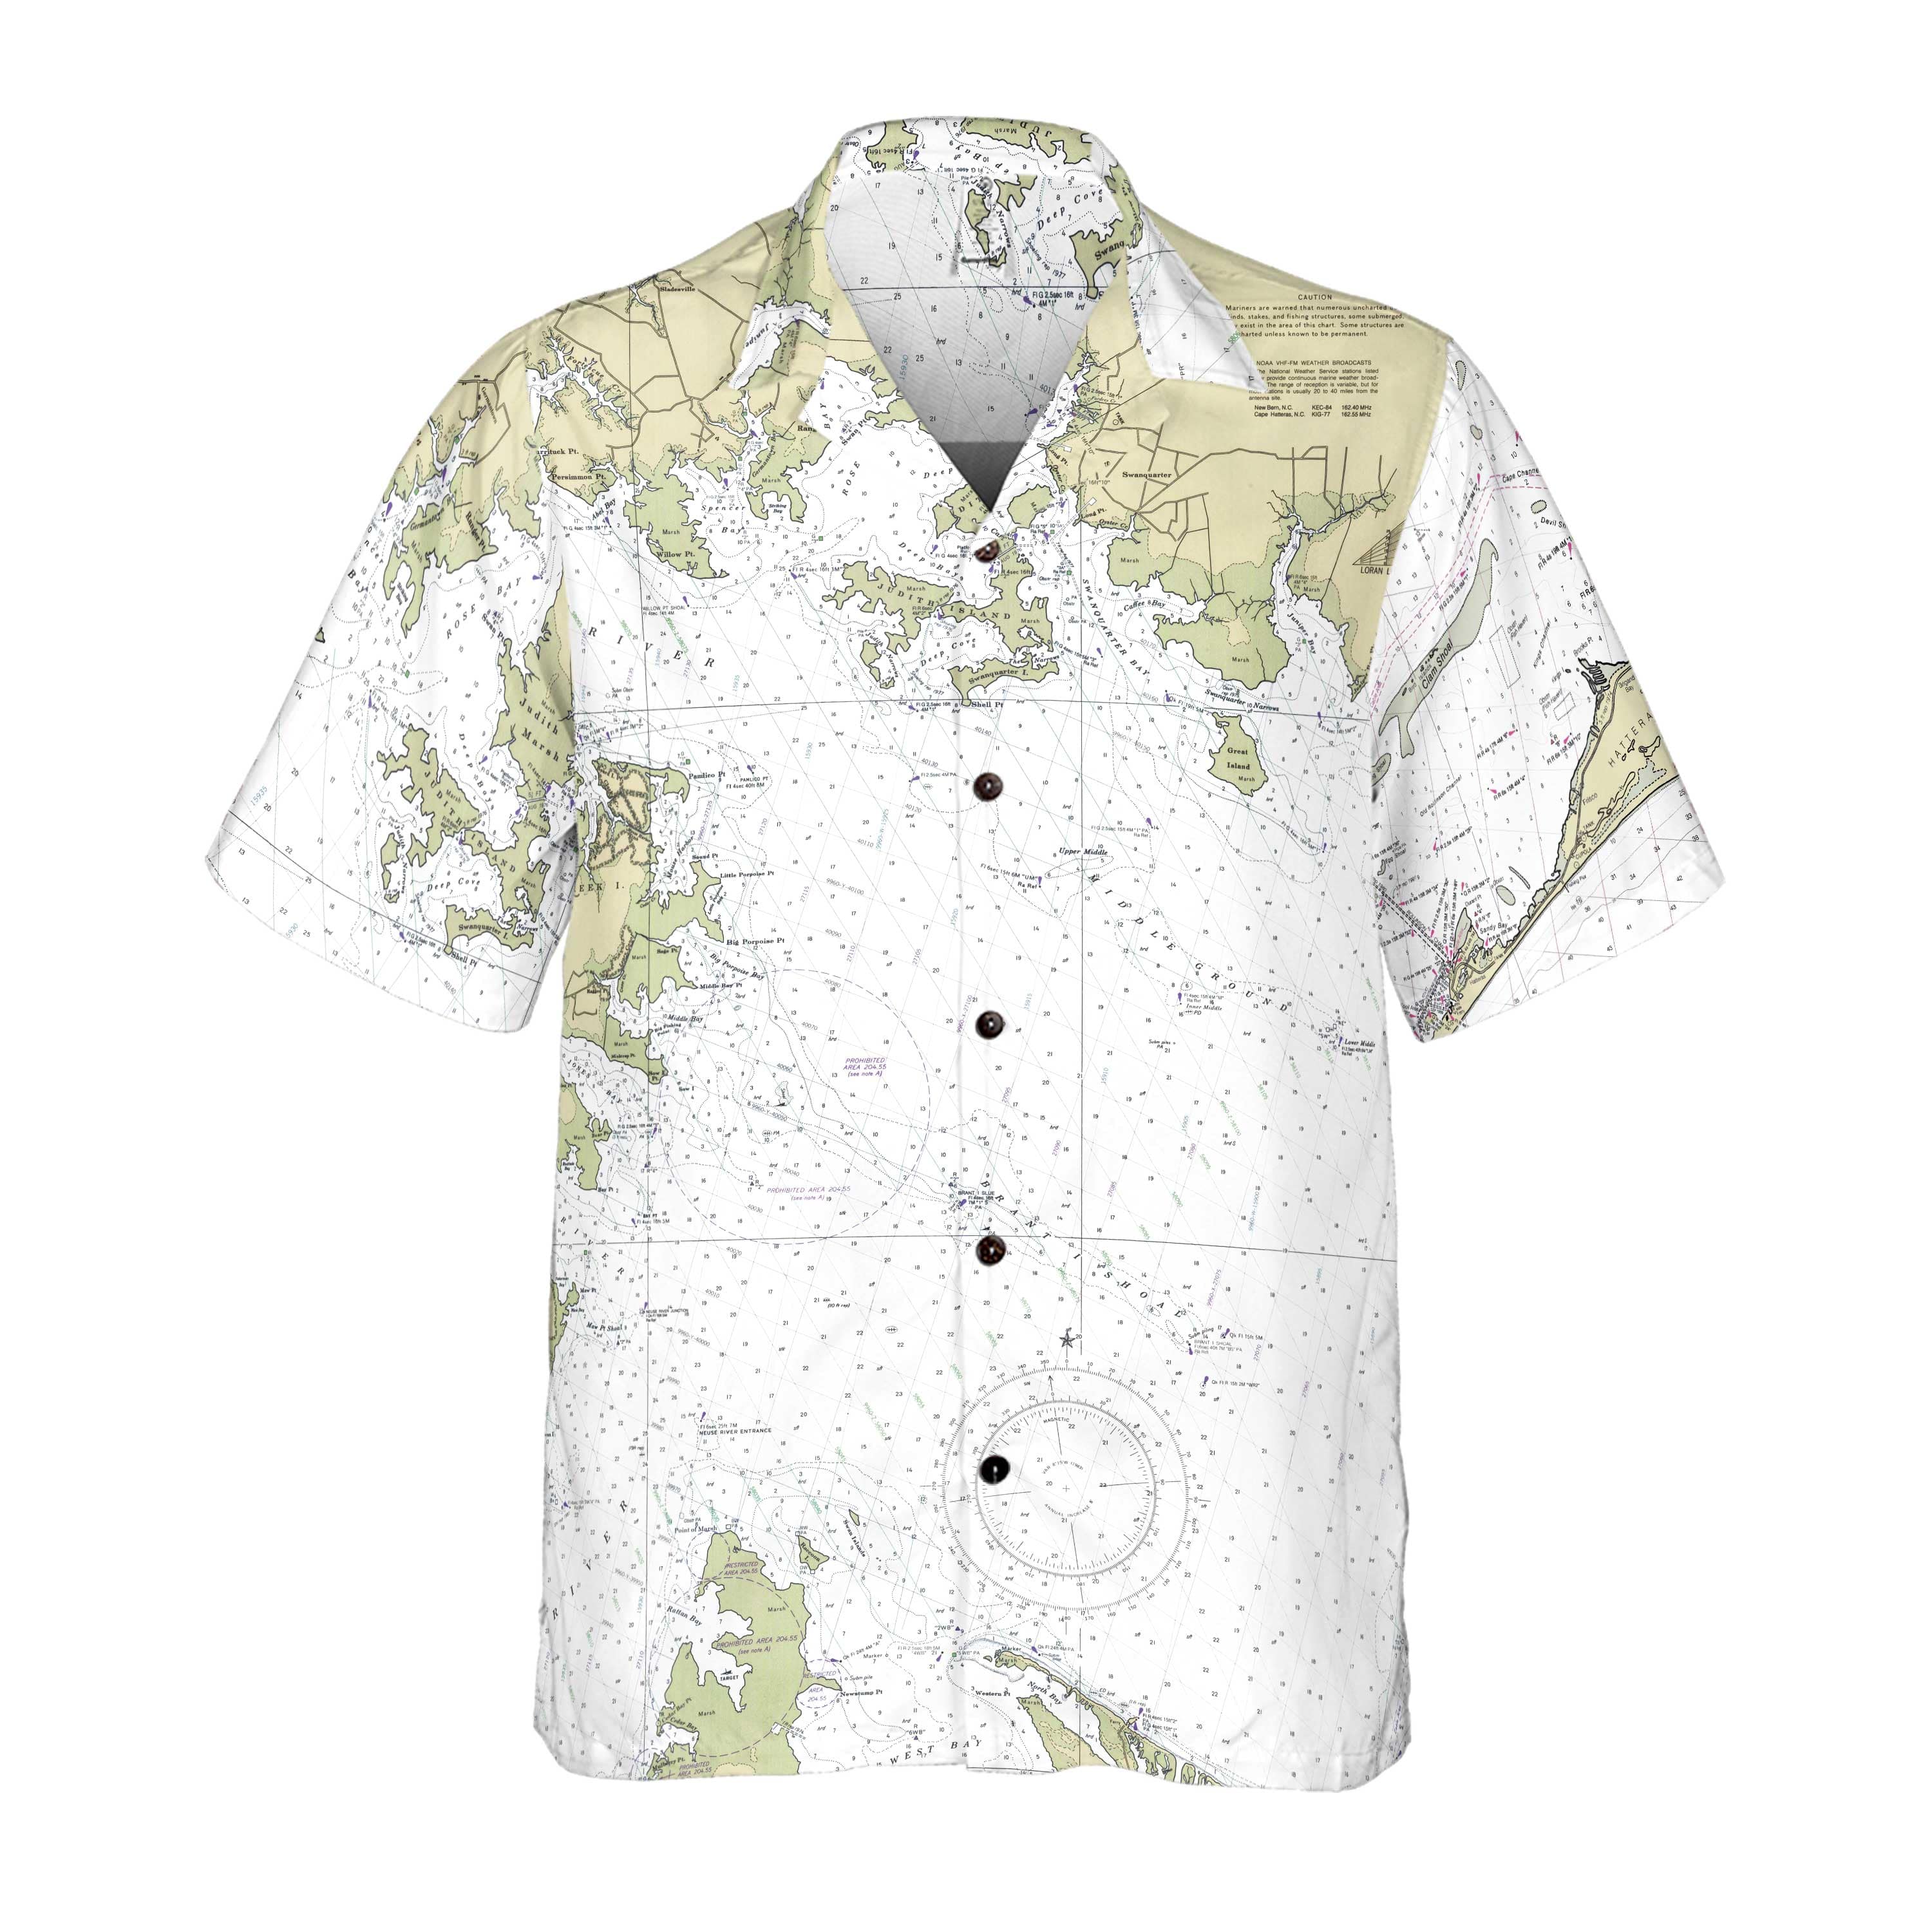 The Pamlico Sound Coconut Button Camp Shirt